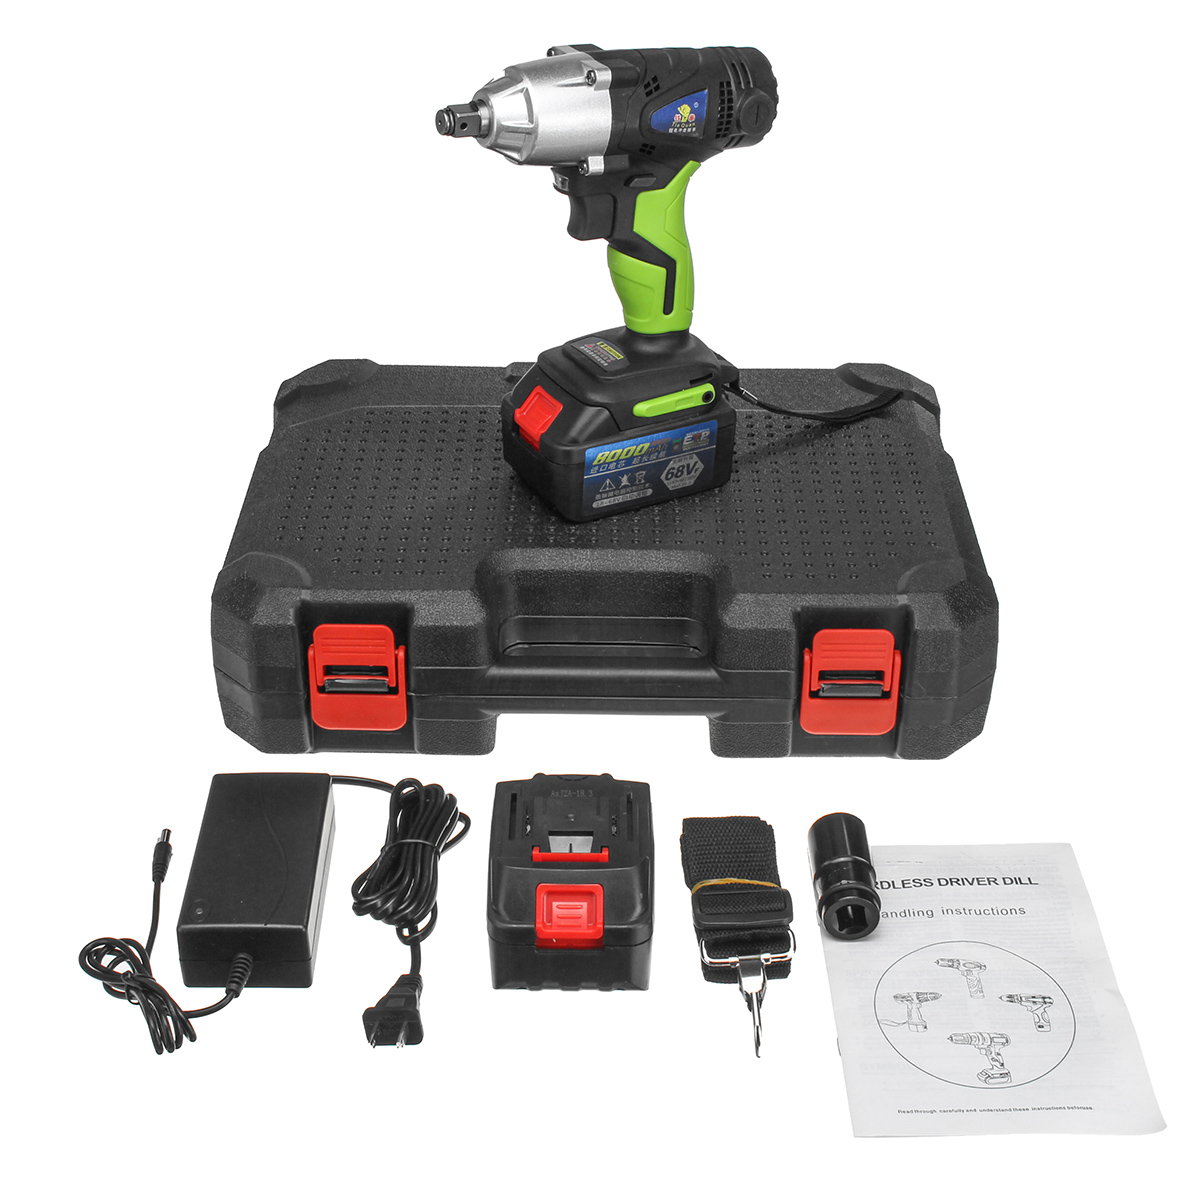 80Ah-68V-Cordless-Impact-Wrench-Li-ion-Power-Driver-Drill-Power-Wrench-Tools-1-Charger-2-Batteries-1286260-8